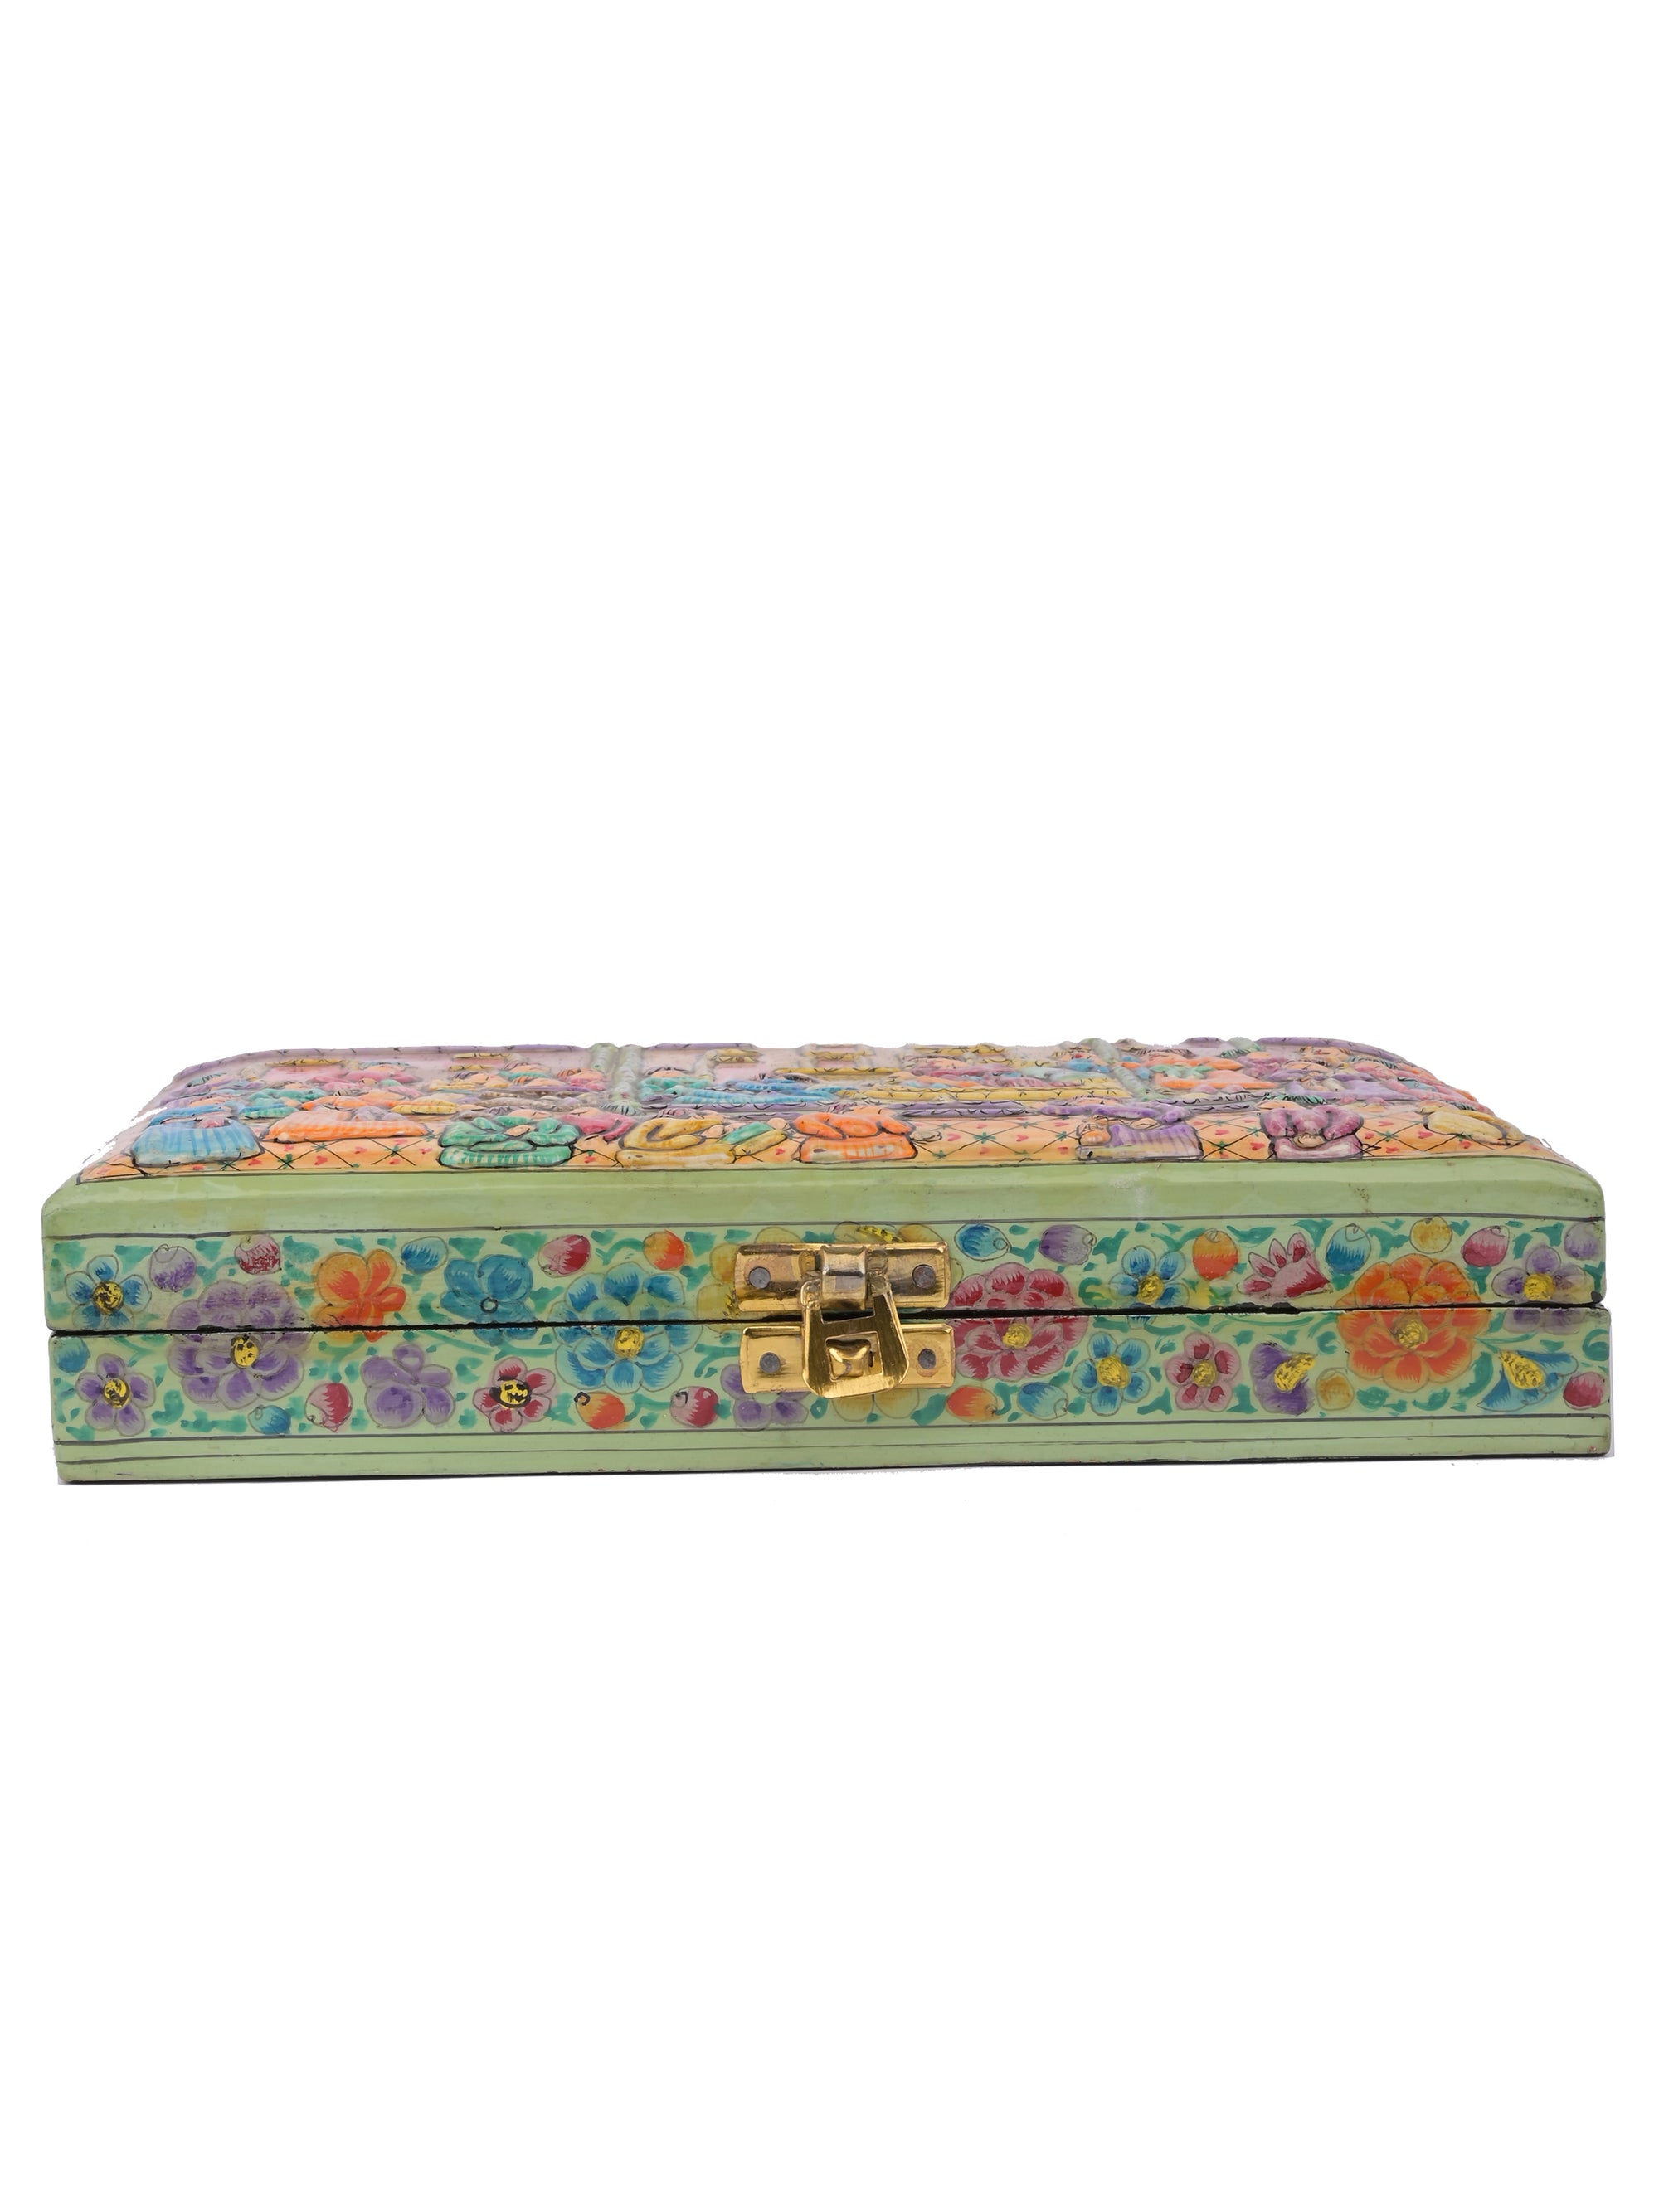 Paper Mache Jewellery box with Mughal Courtyard design embossed - The Heritage Artifacts